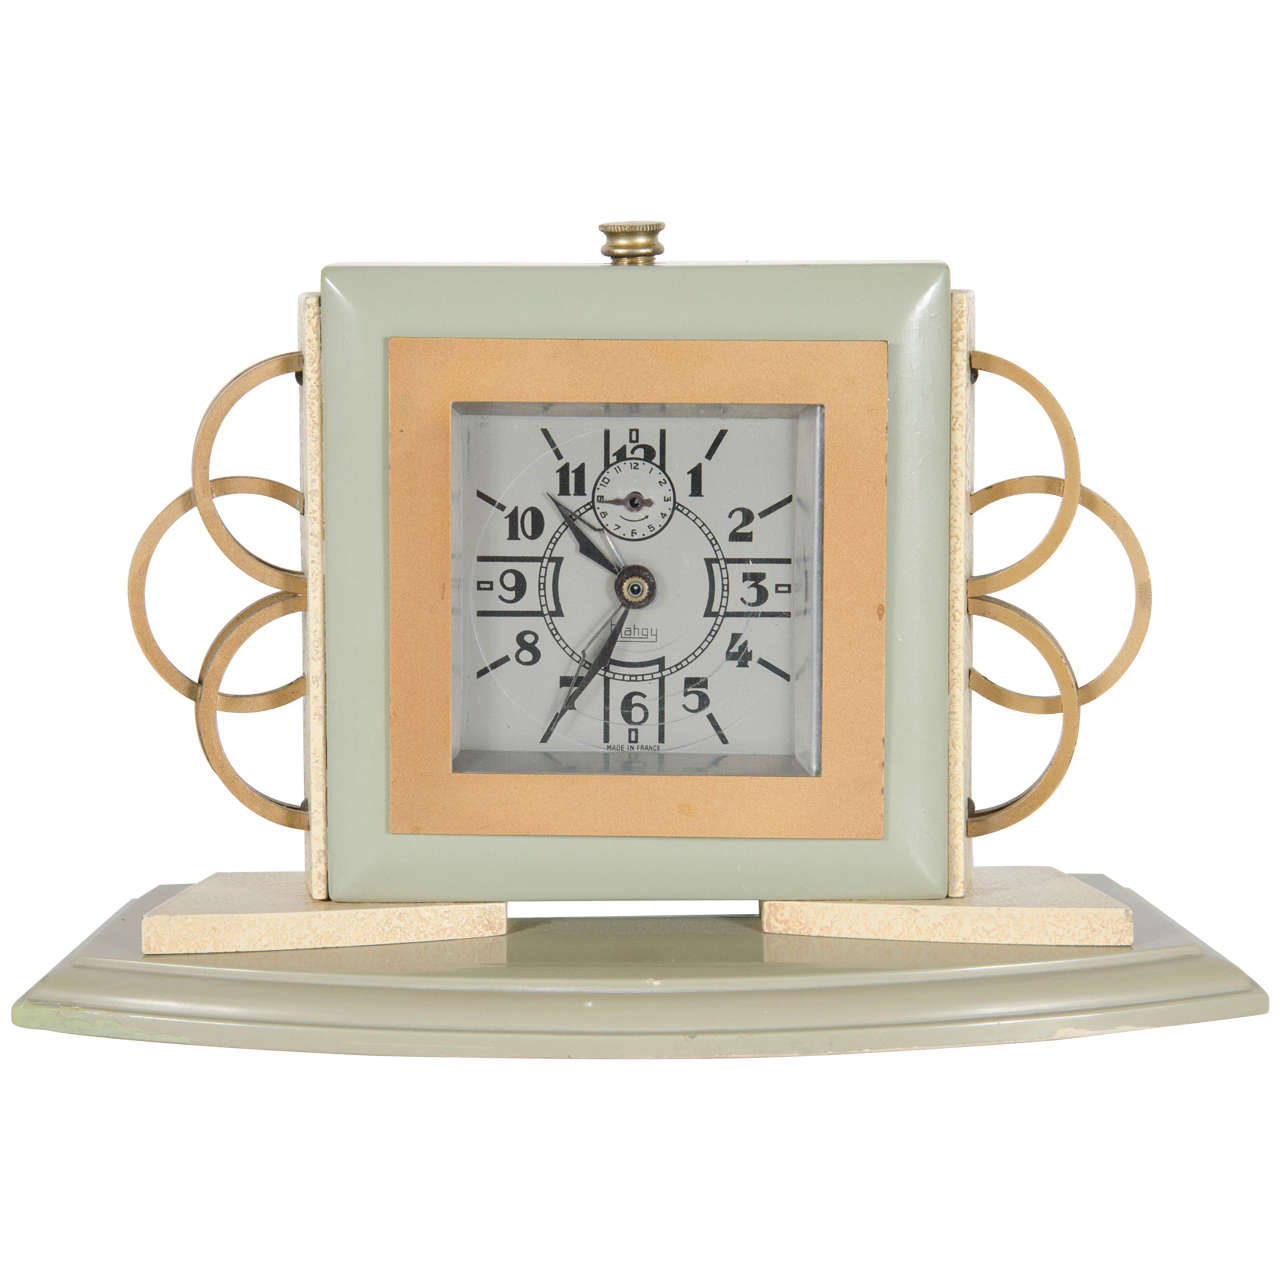 Exceptional Art Deco Directoire Style Table Clock by Blahgy